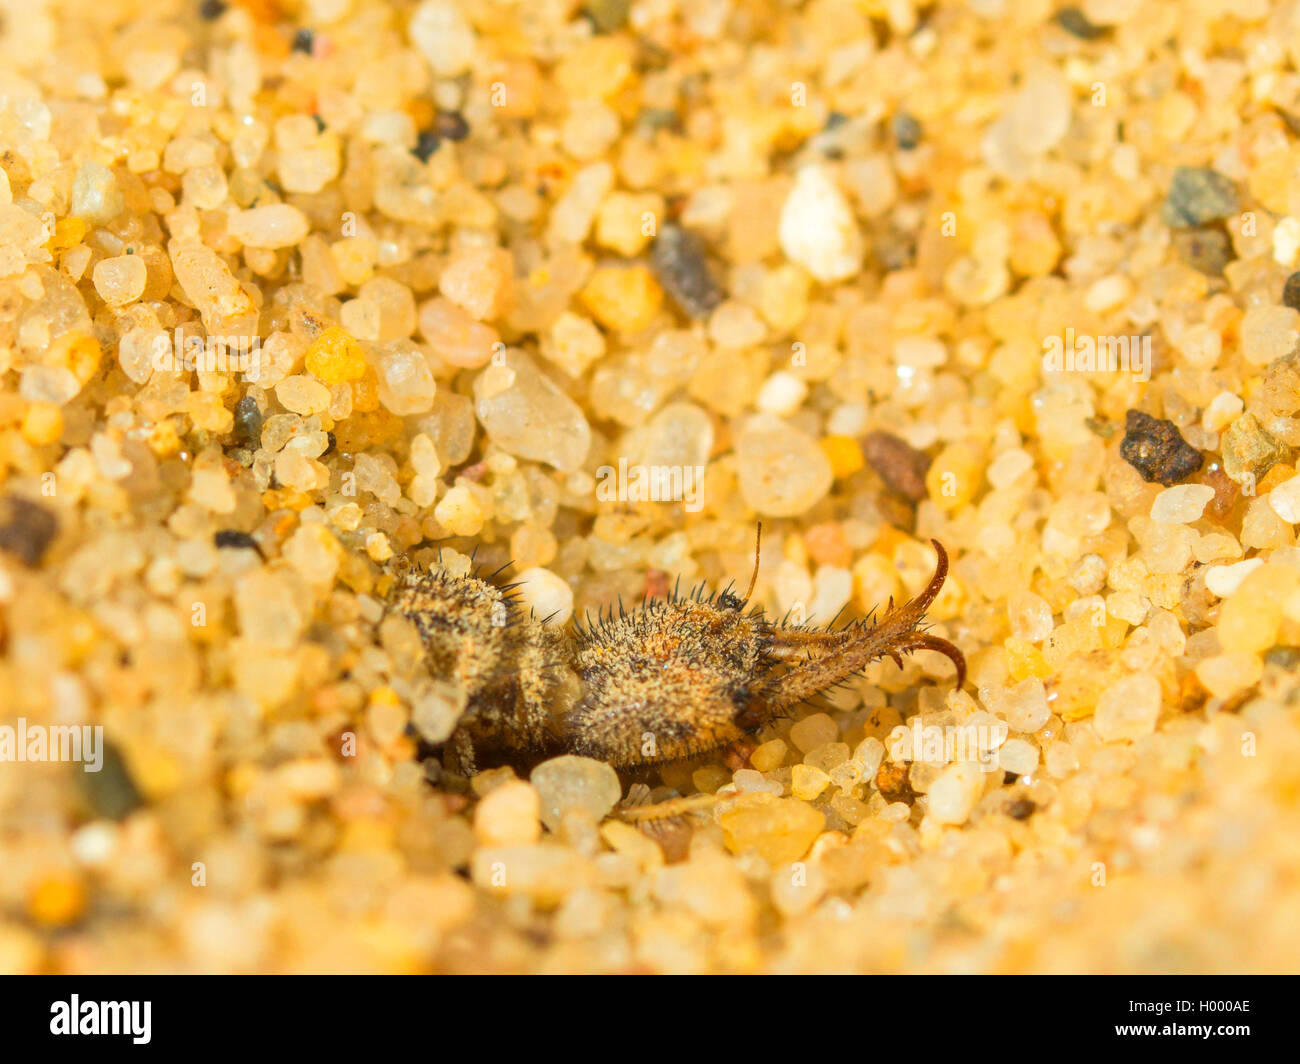 European antlion (Euroleon nostras), Antlion (mature larva) cleaning its pincers while constructing a conical pit in the sandy soil, Germany Stock Photo